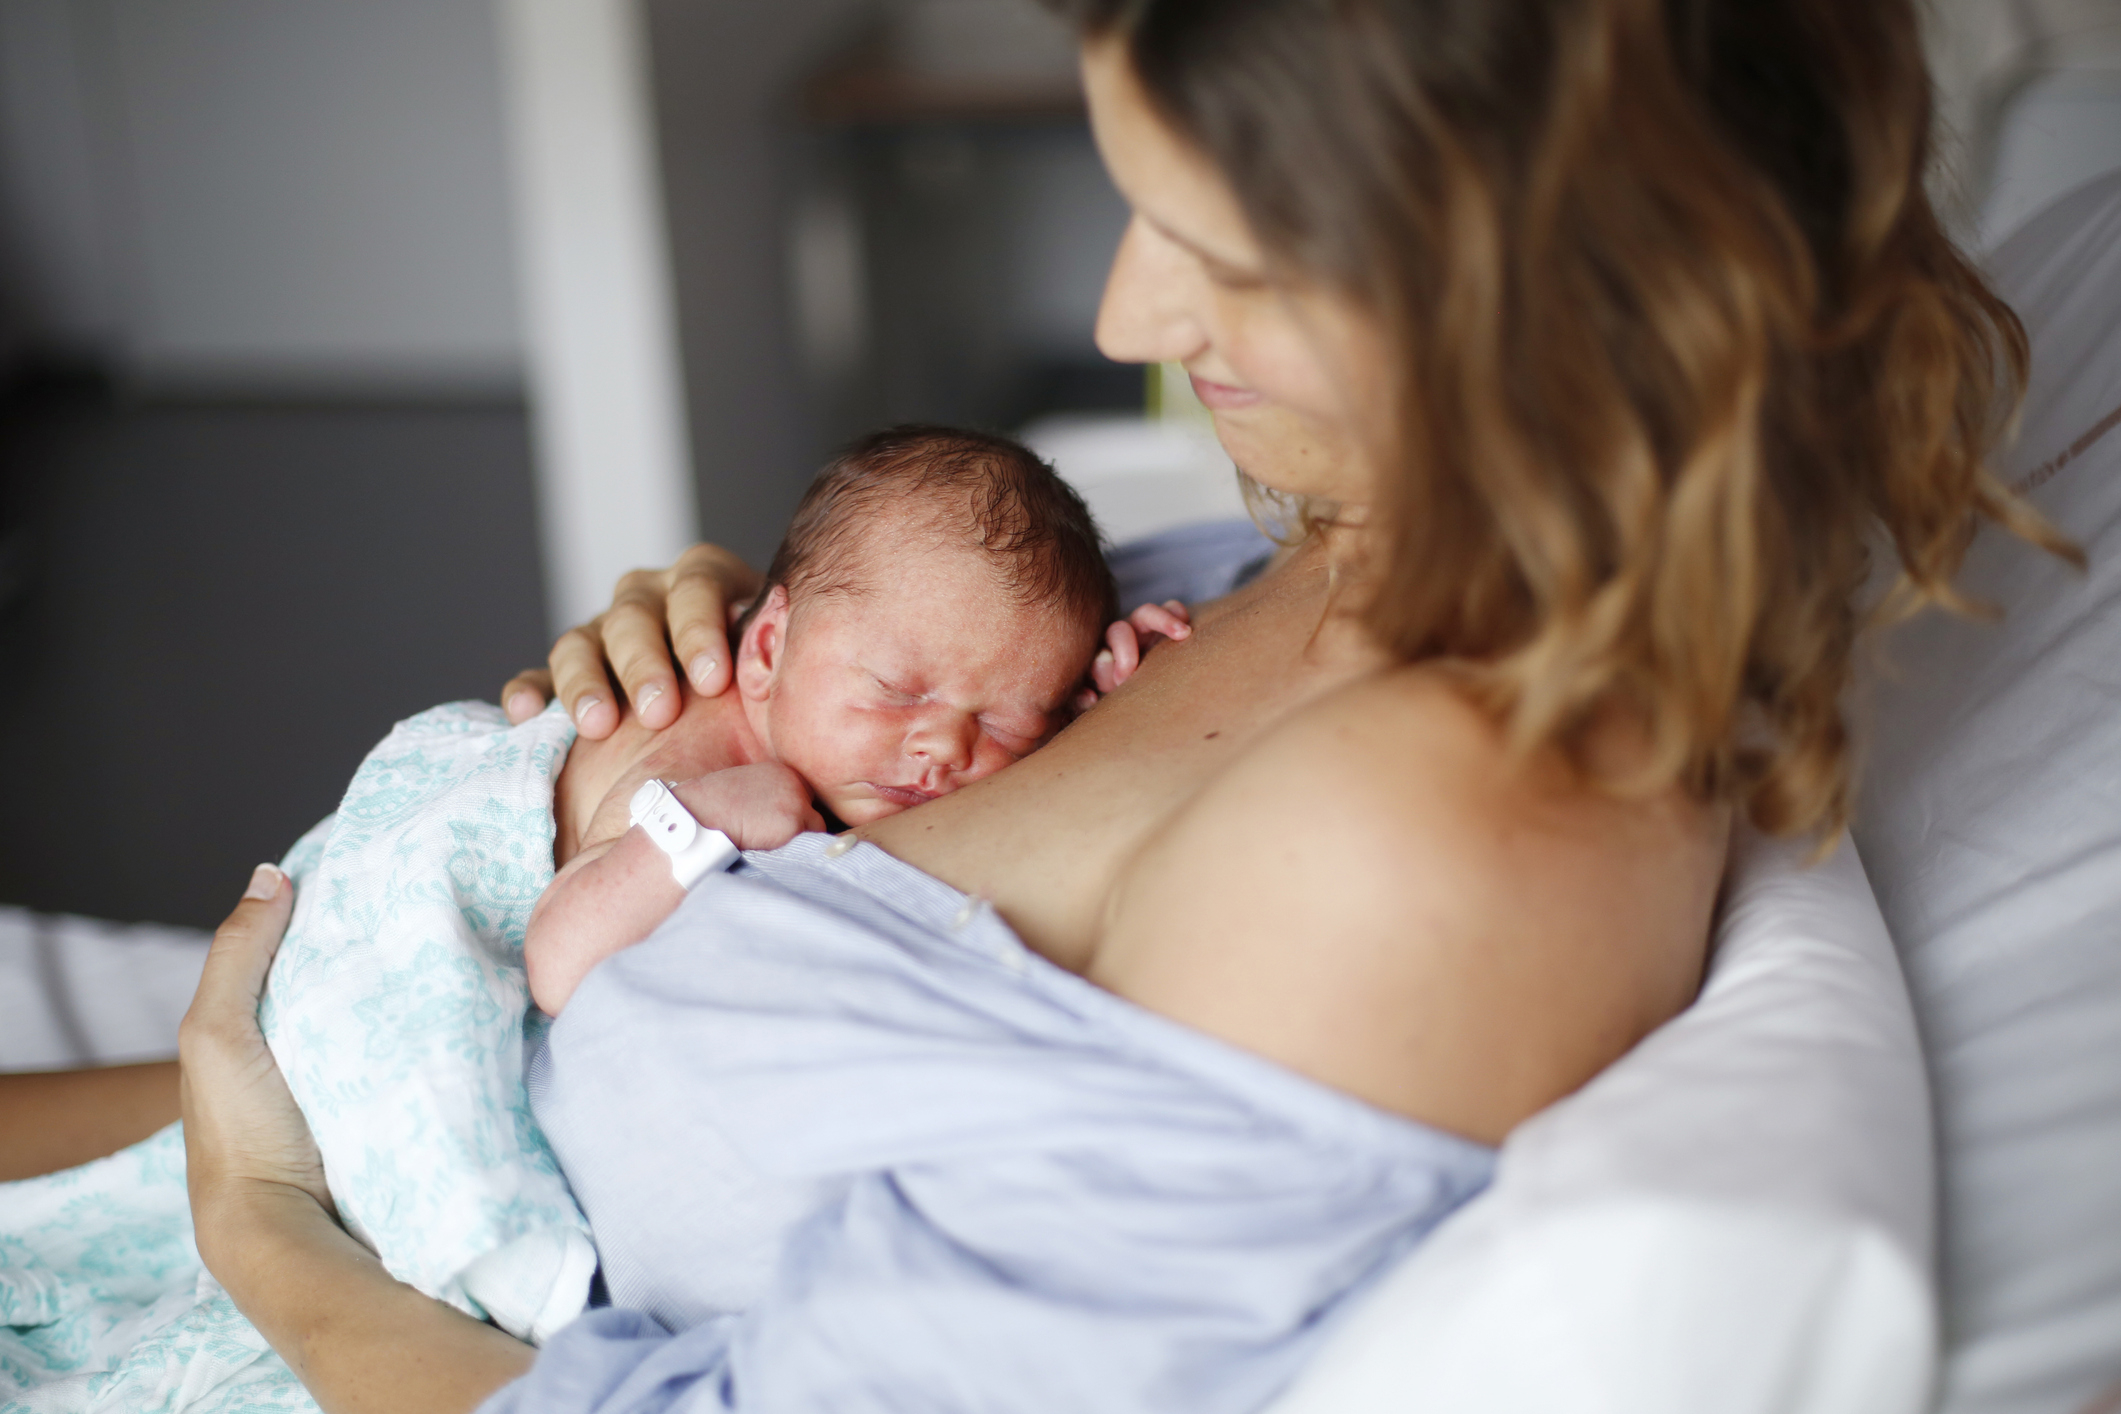 A woman in the hospital holding her newborn